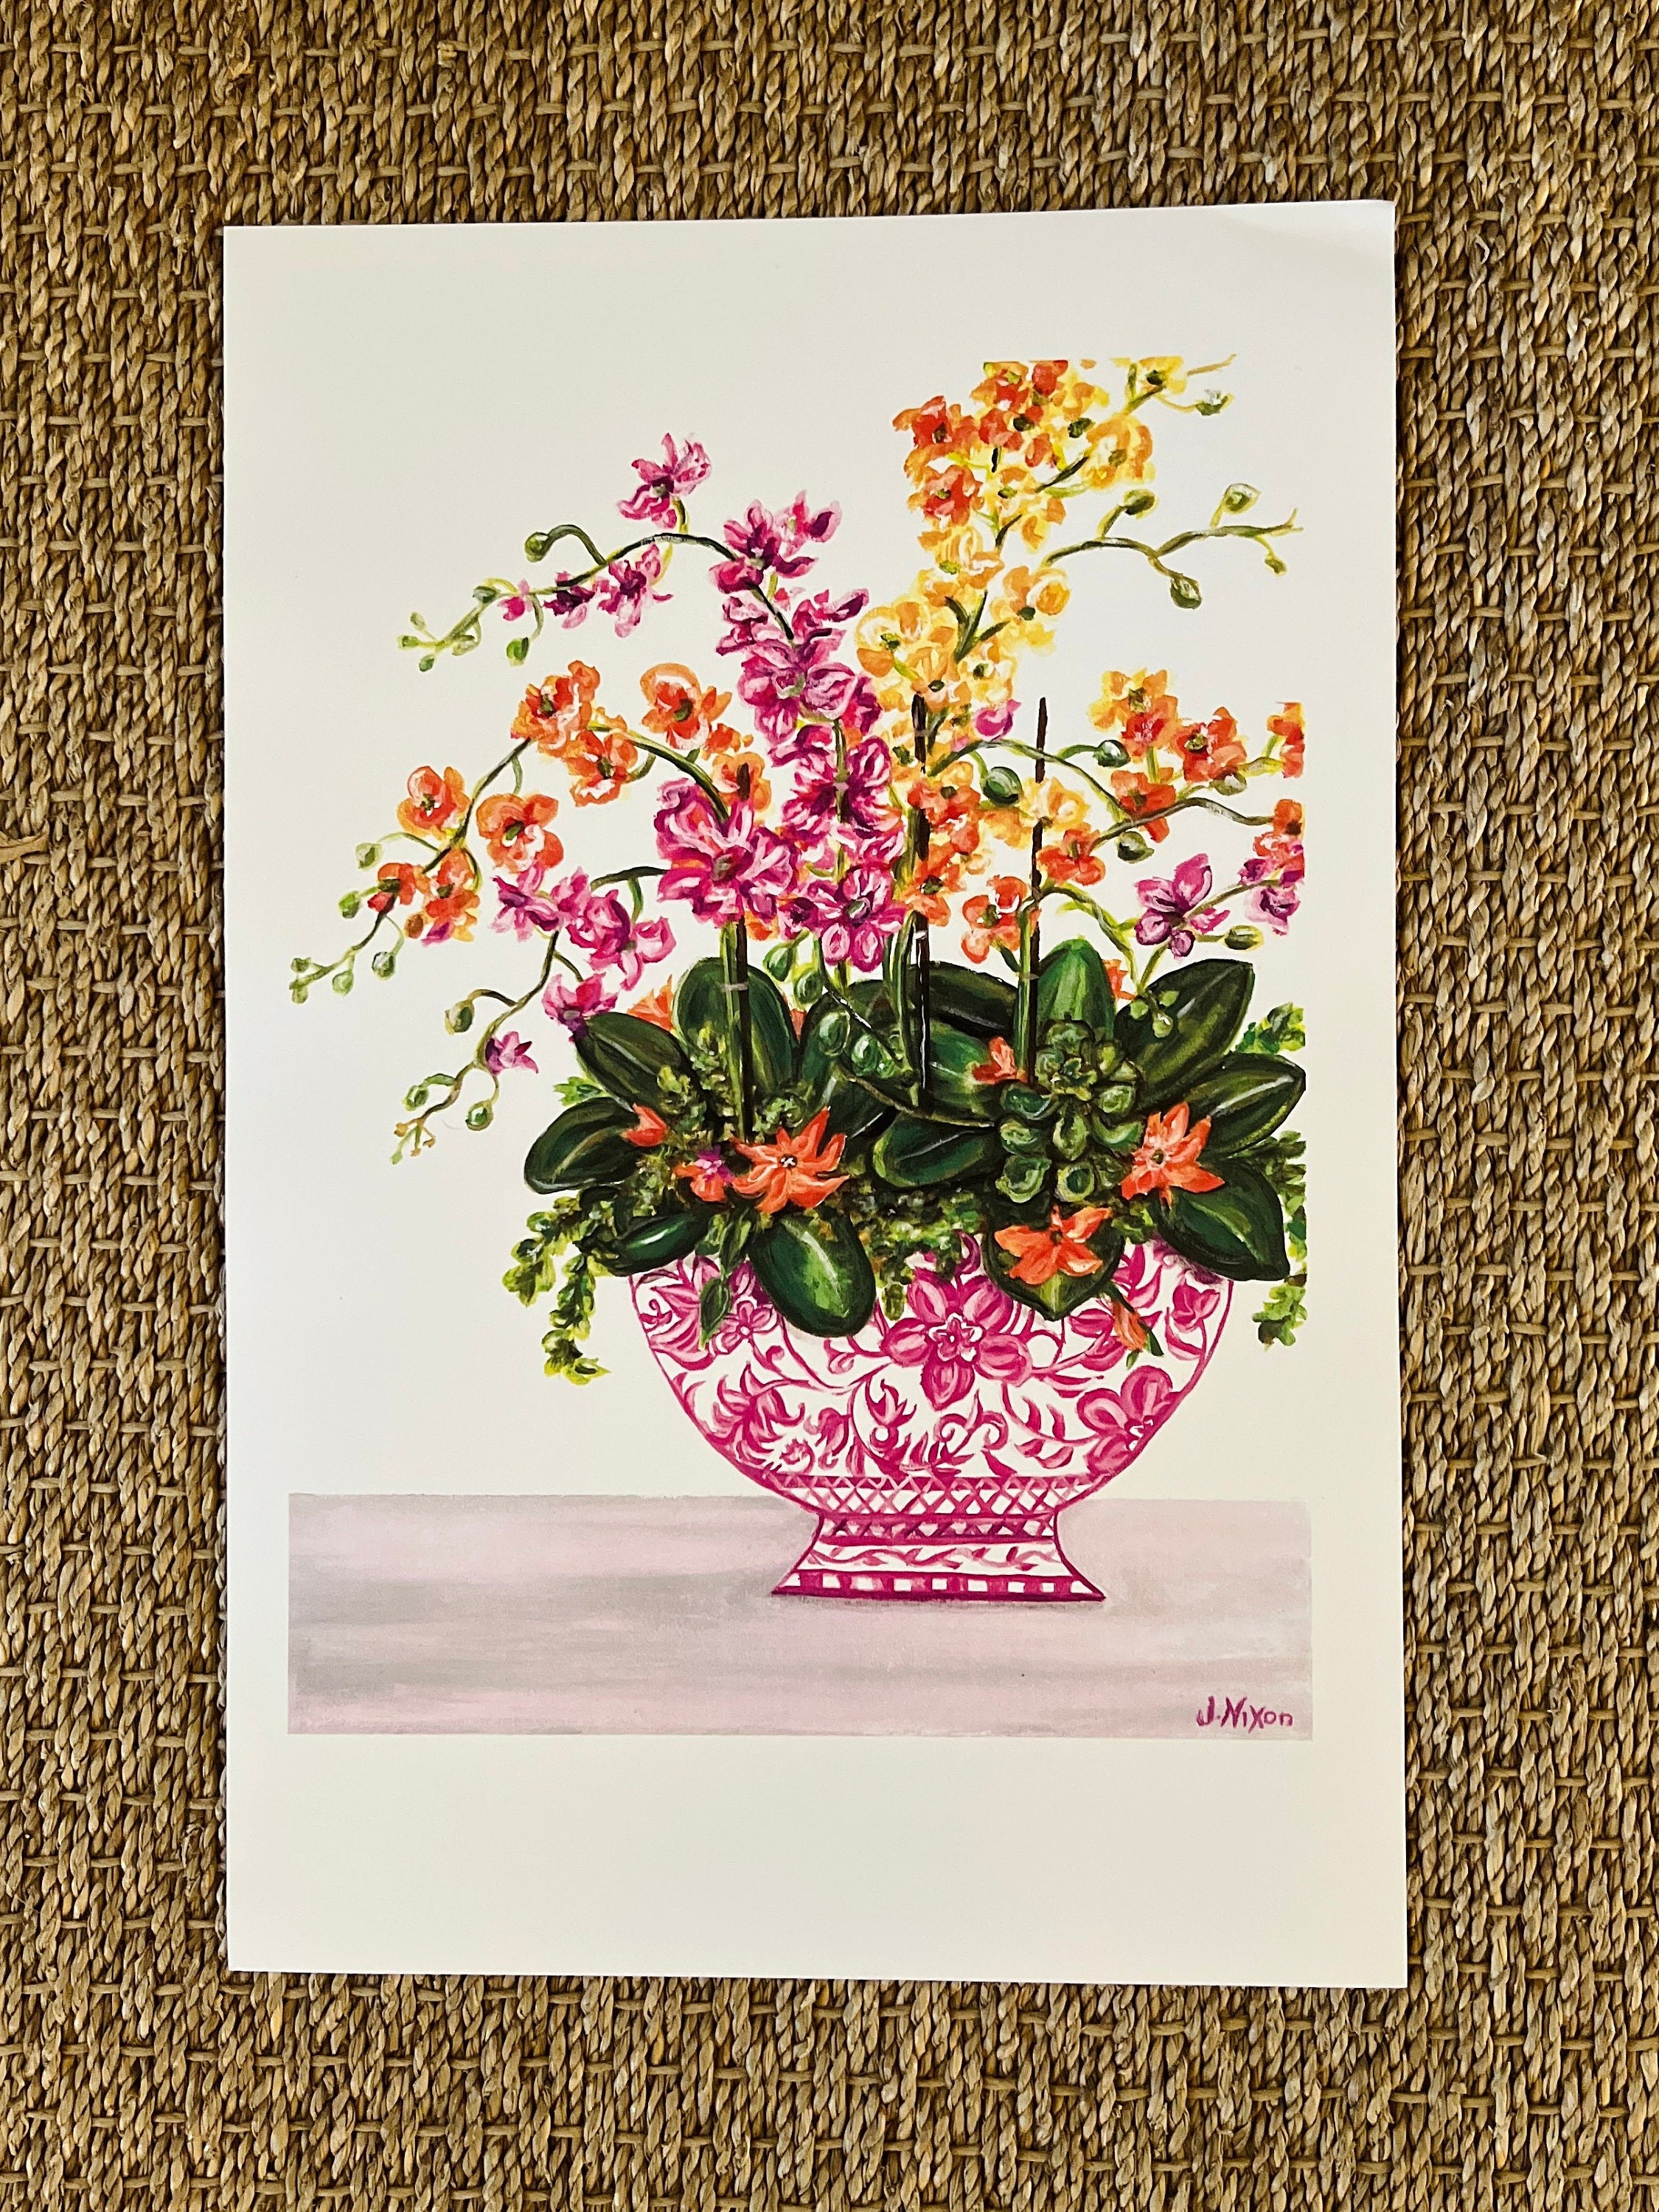 Set of Chinoiserie floral and pink ginger jar prints, unframed